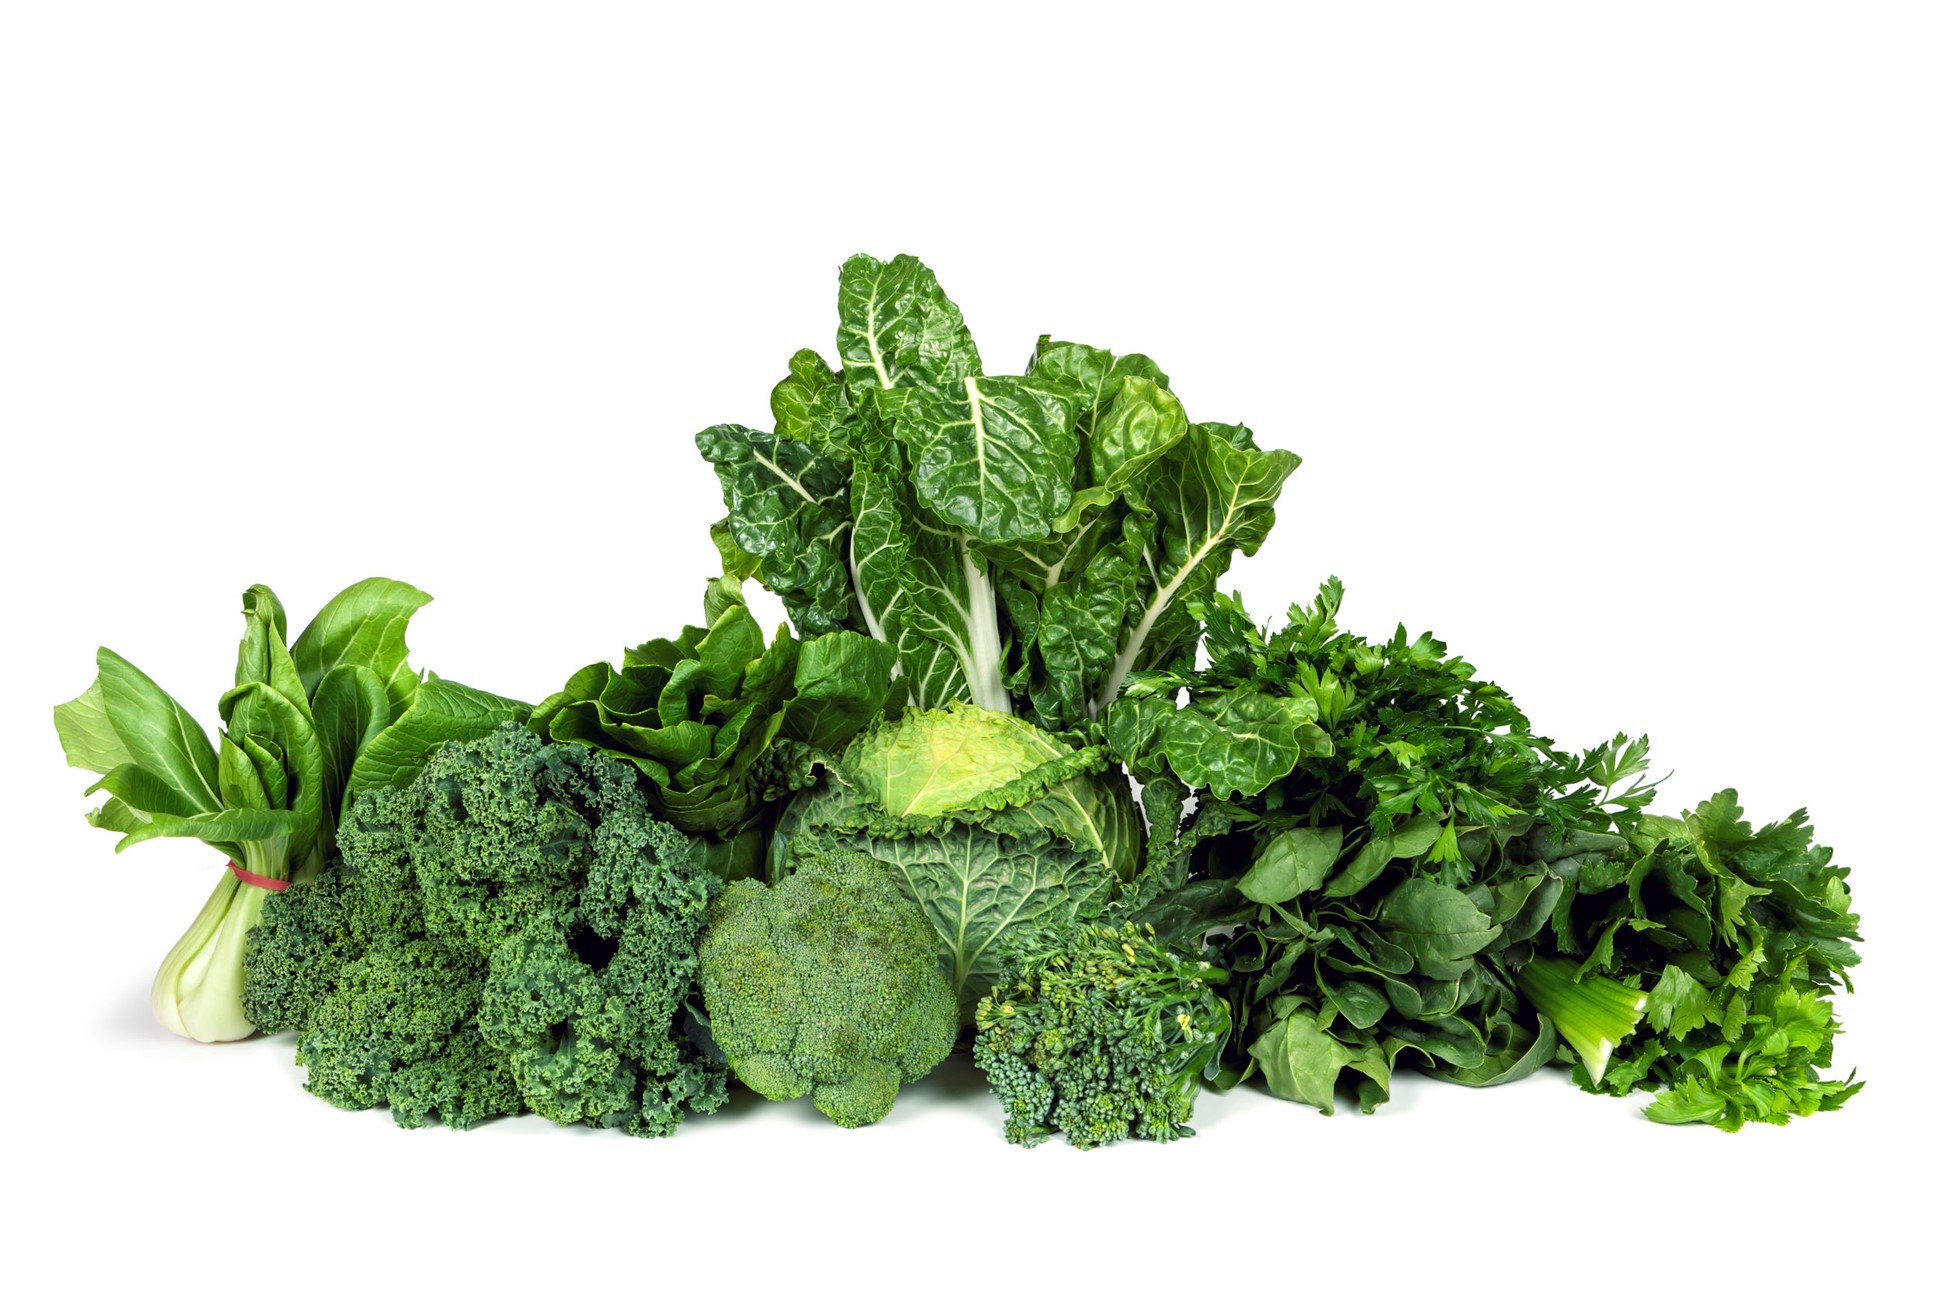 Green leafy vegetables are the best food to take after surgery